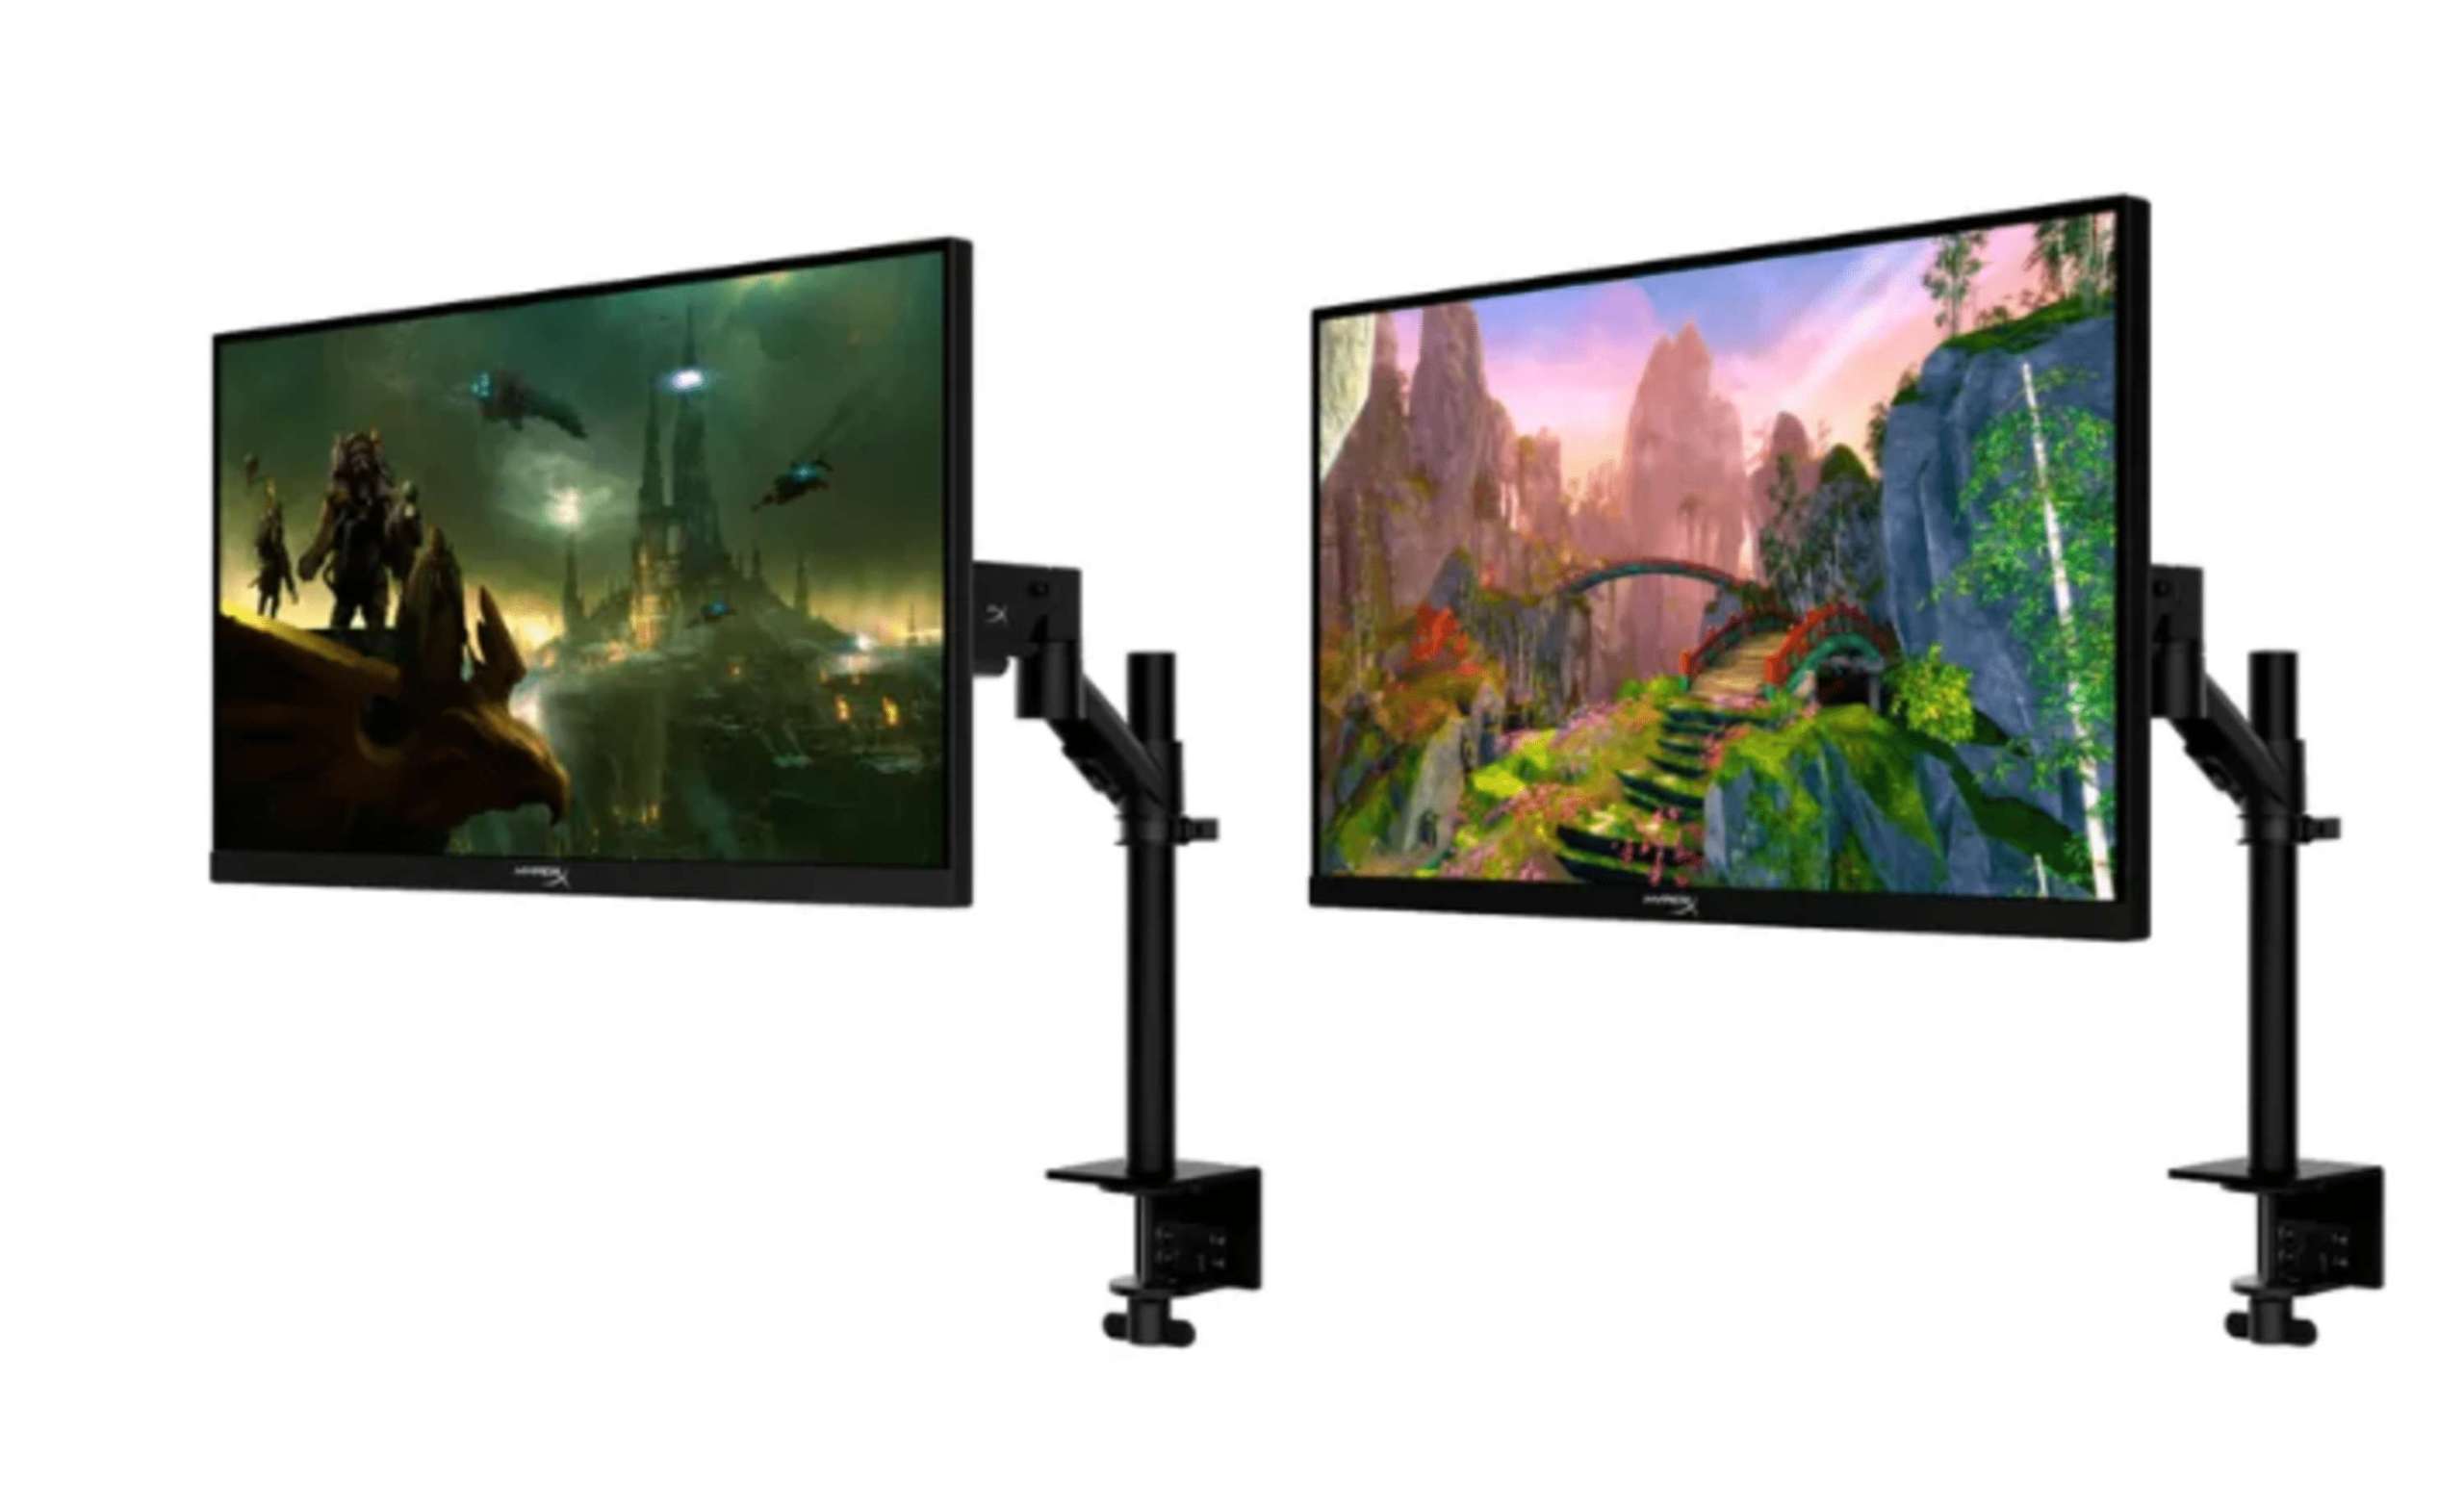 When It Comes To Its Armada HD And QHD Gaming Monitors, HyperX Is Aiming For The Ideal Range